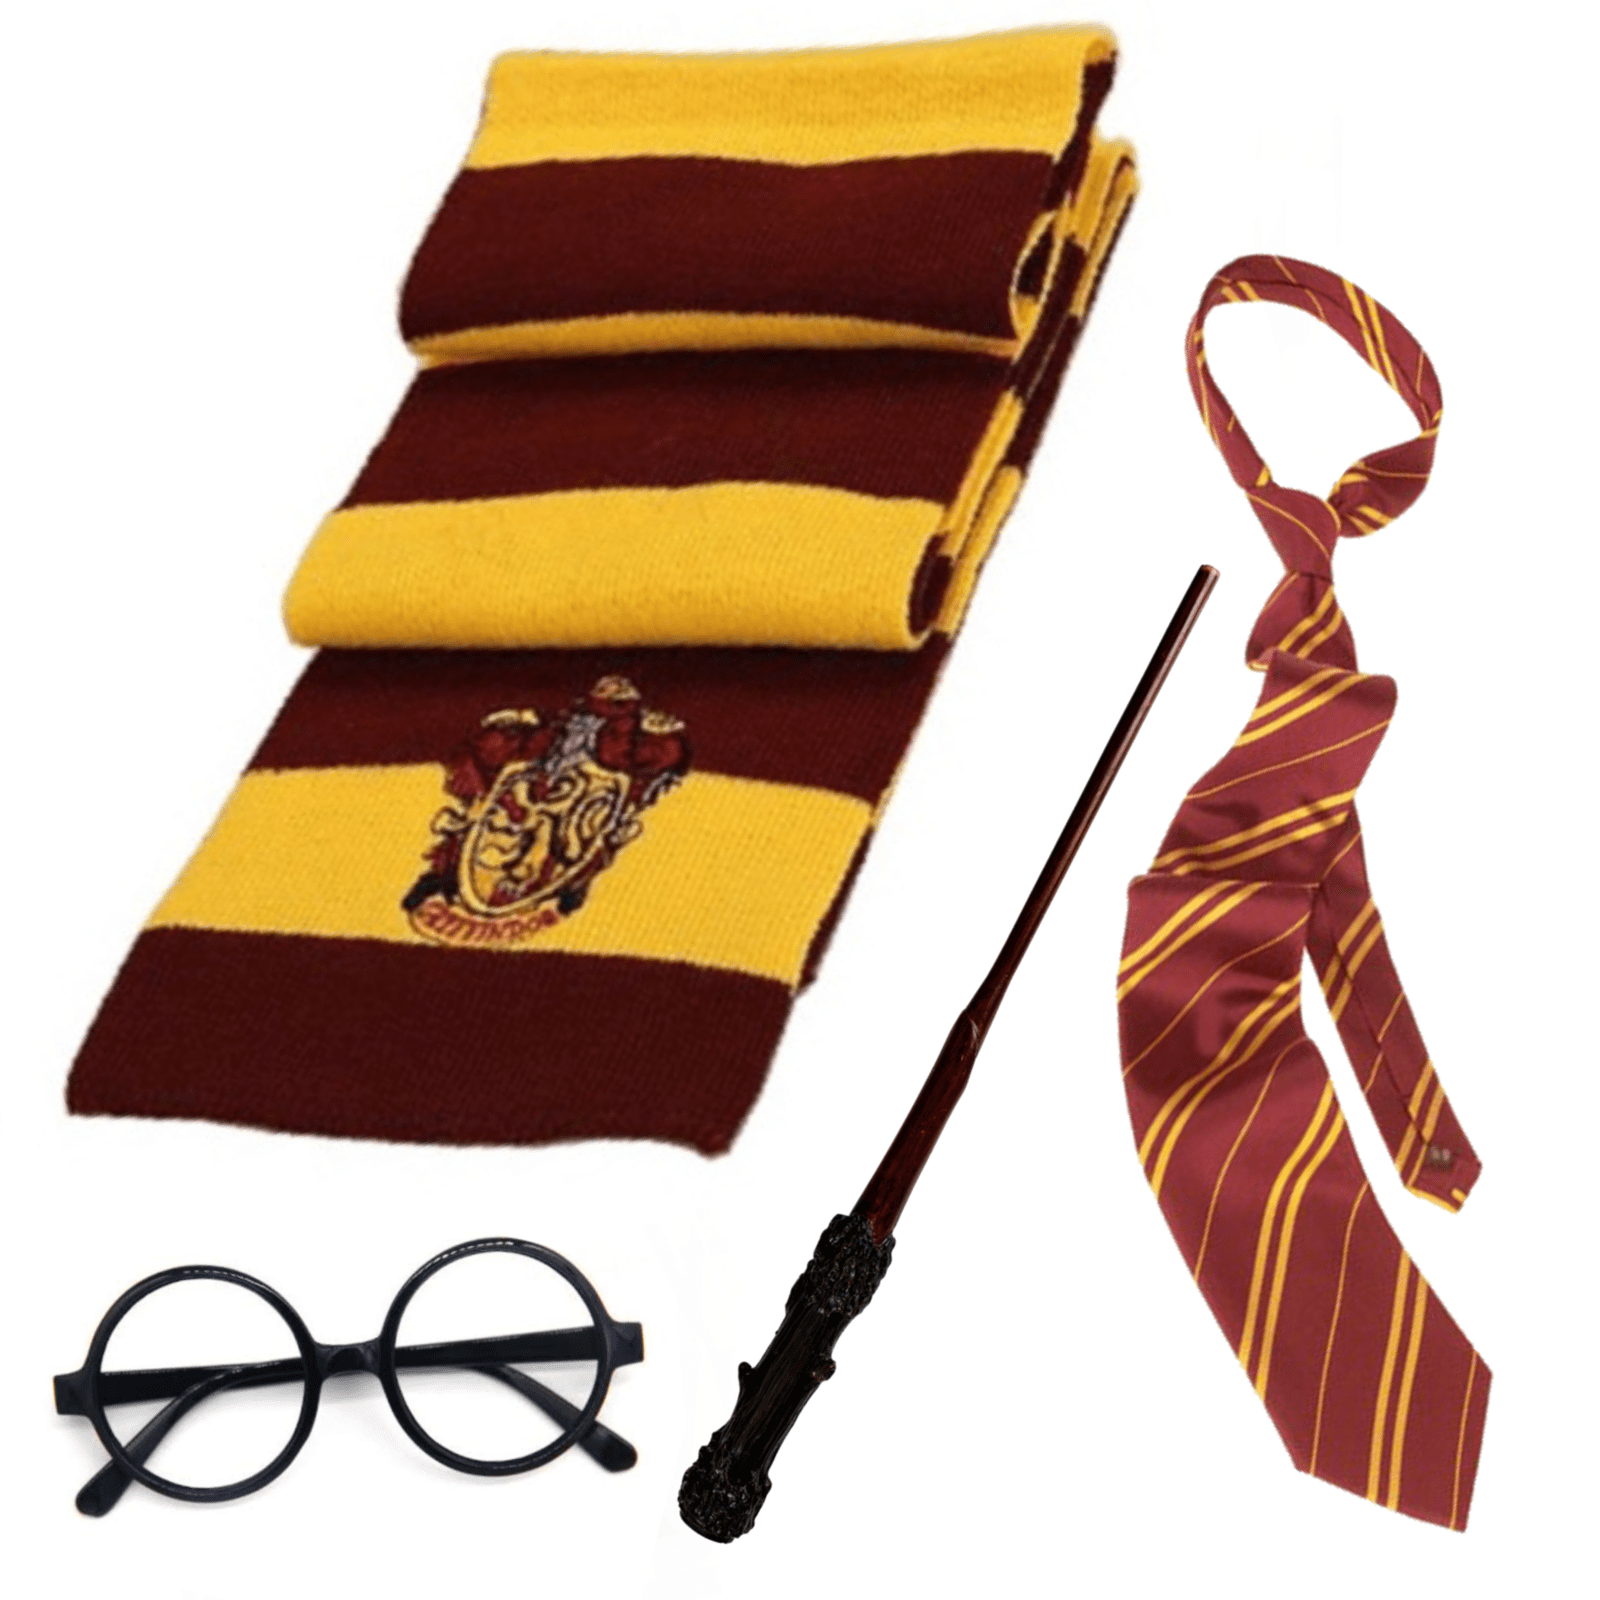 Featured image for “Harry Wizard Accessory Set”